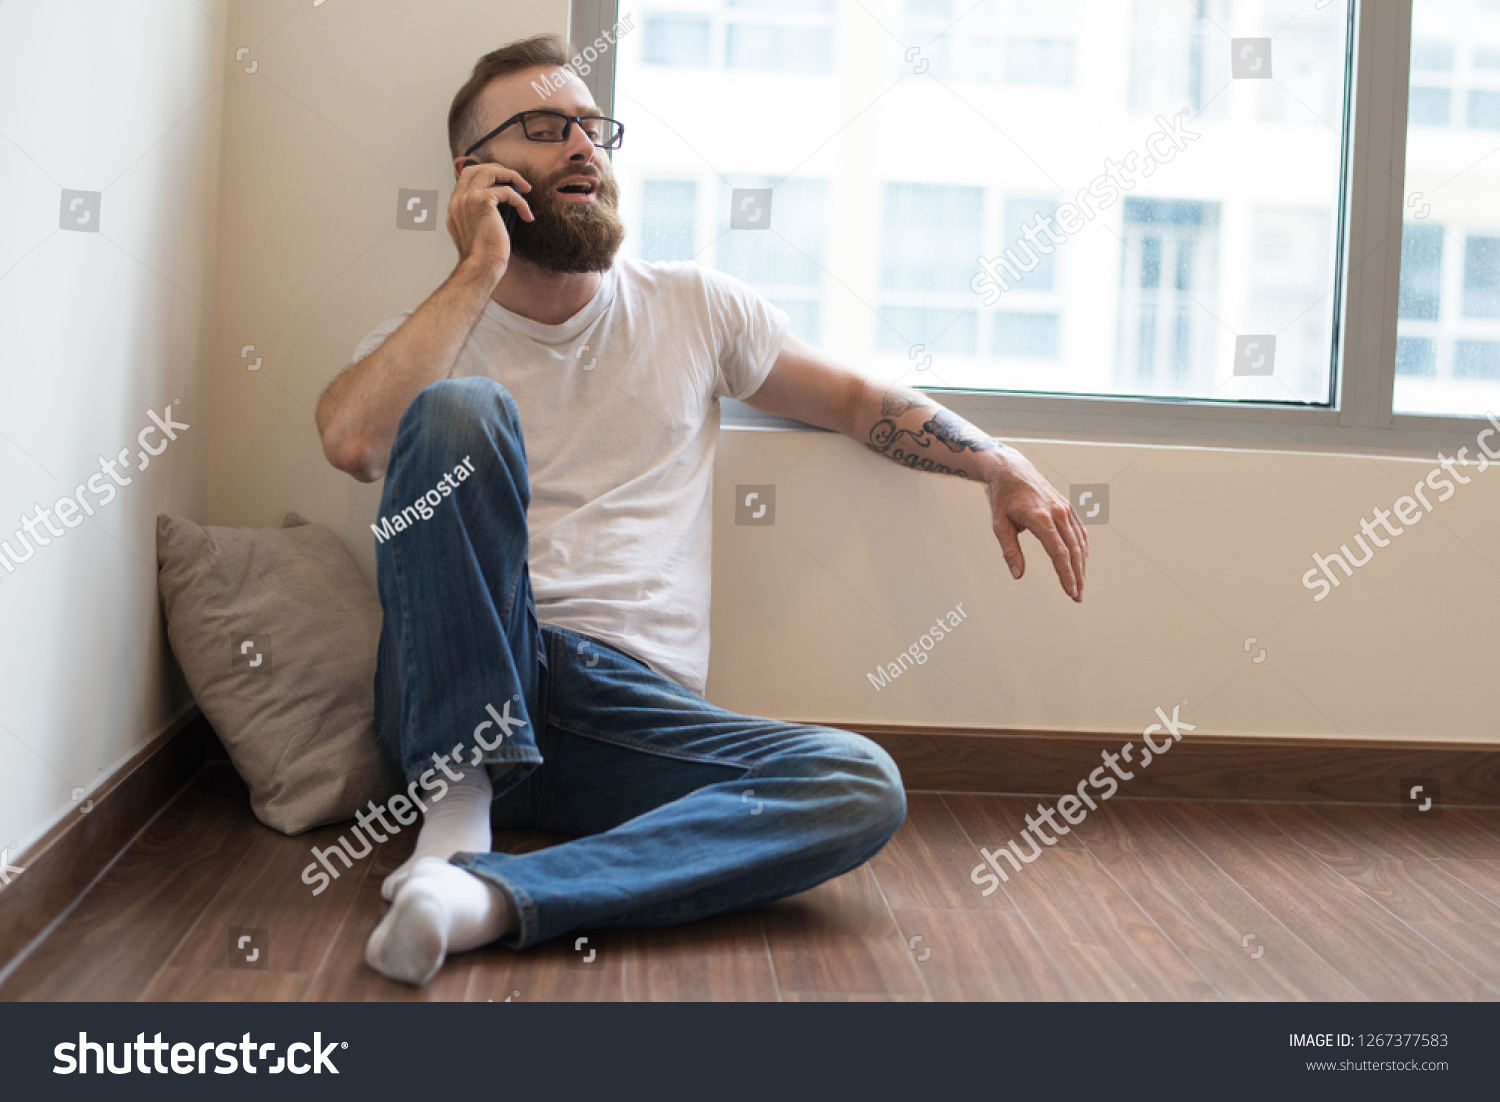 Confident handsome young man in glasses talking on phone. Content bearded guy sitting on floor and expressing his opinion while communicating on phone. Conversation concept #1267377583